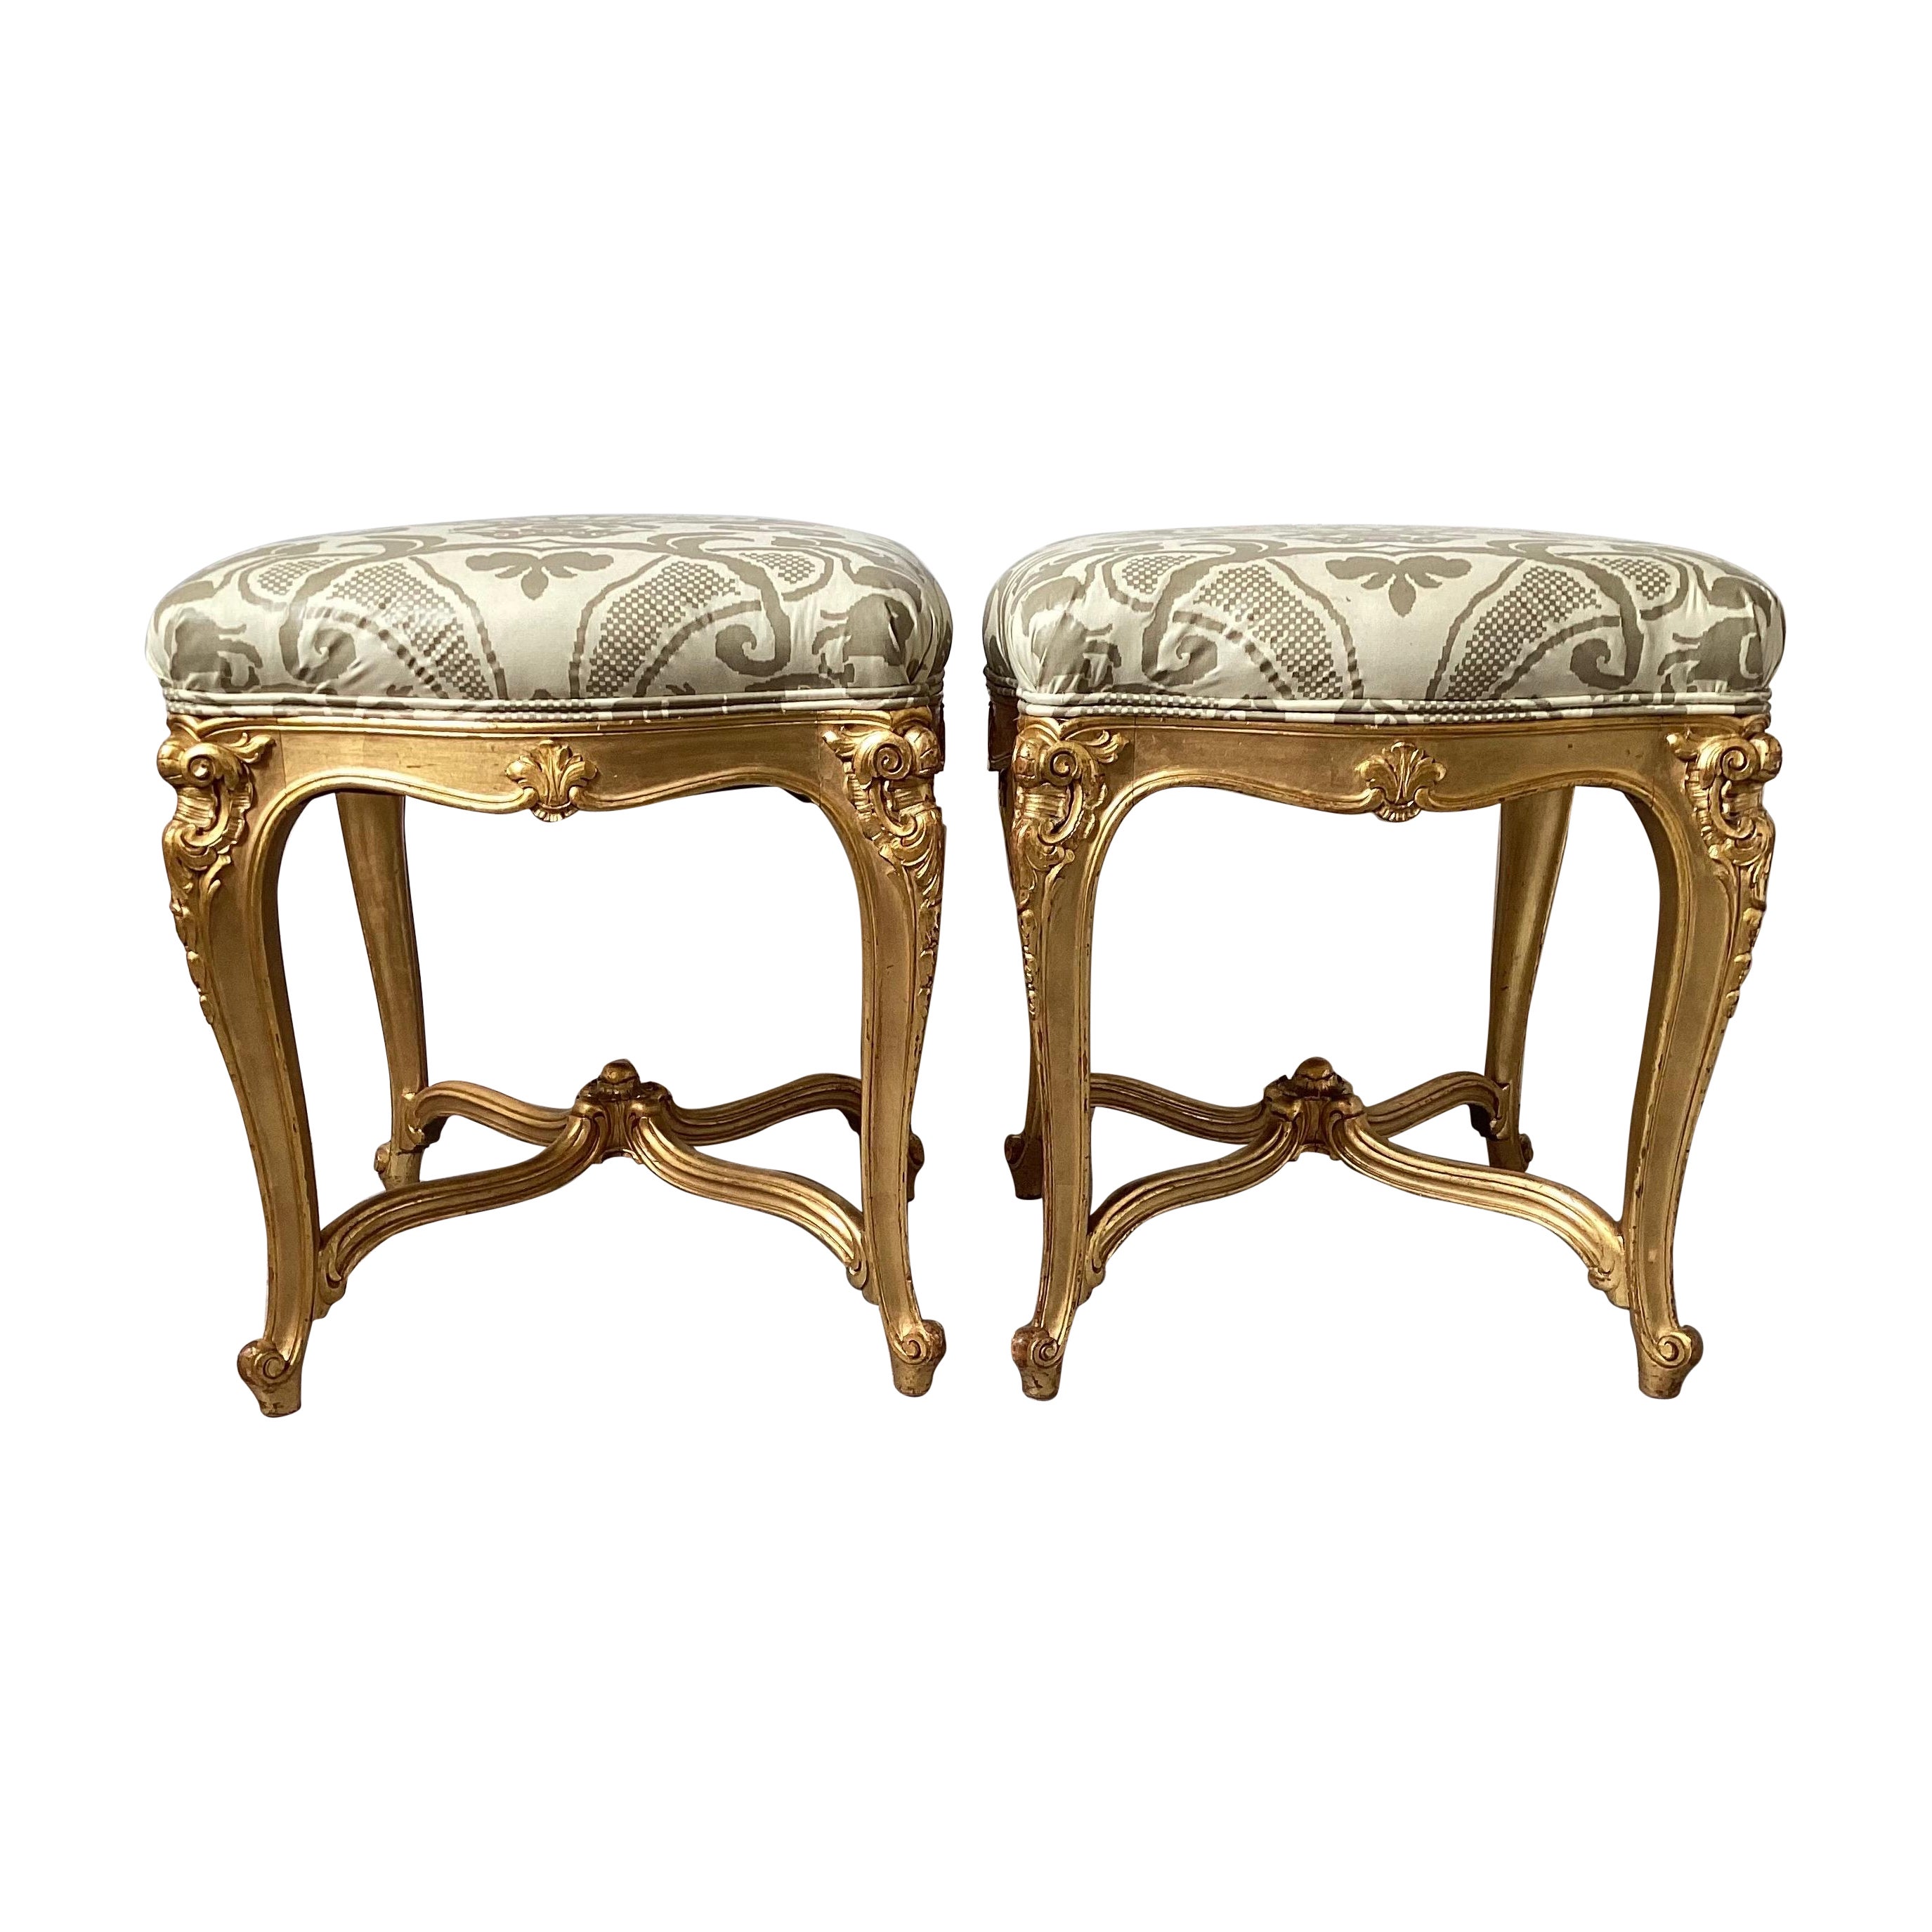 Pair of Hand Carved Giltwood Square Benches Louis XV Style circa 1900